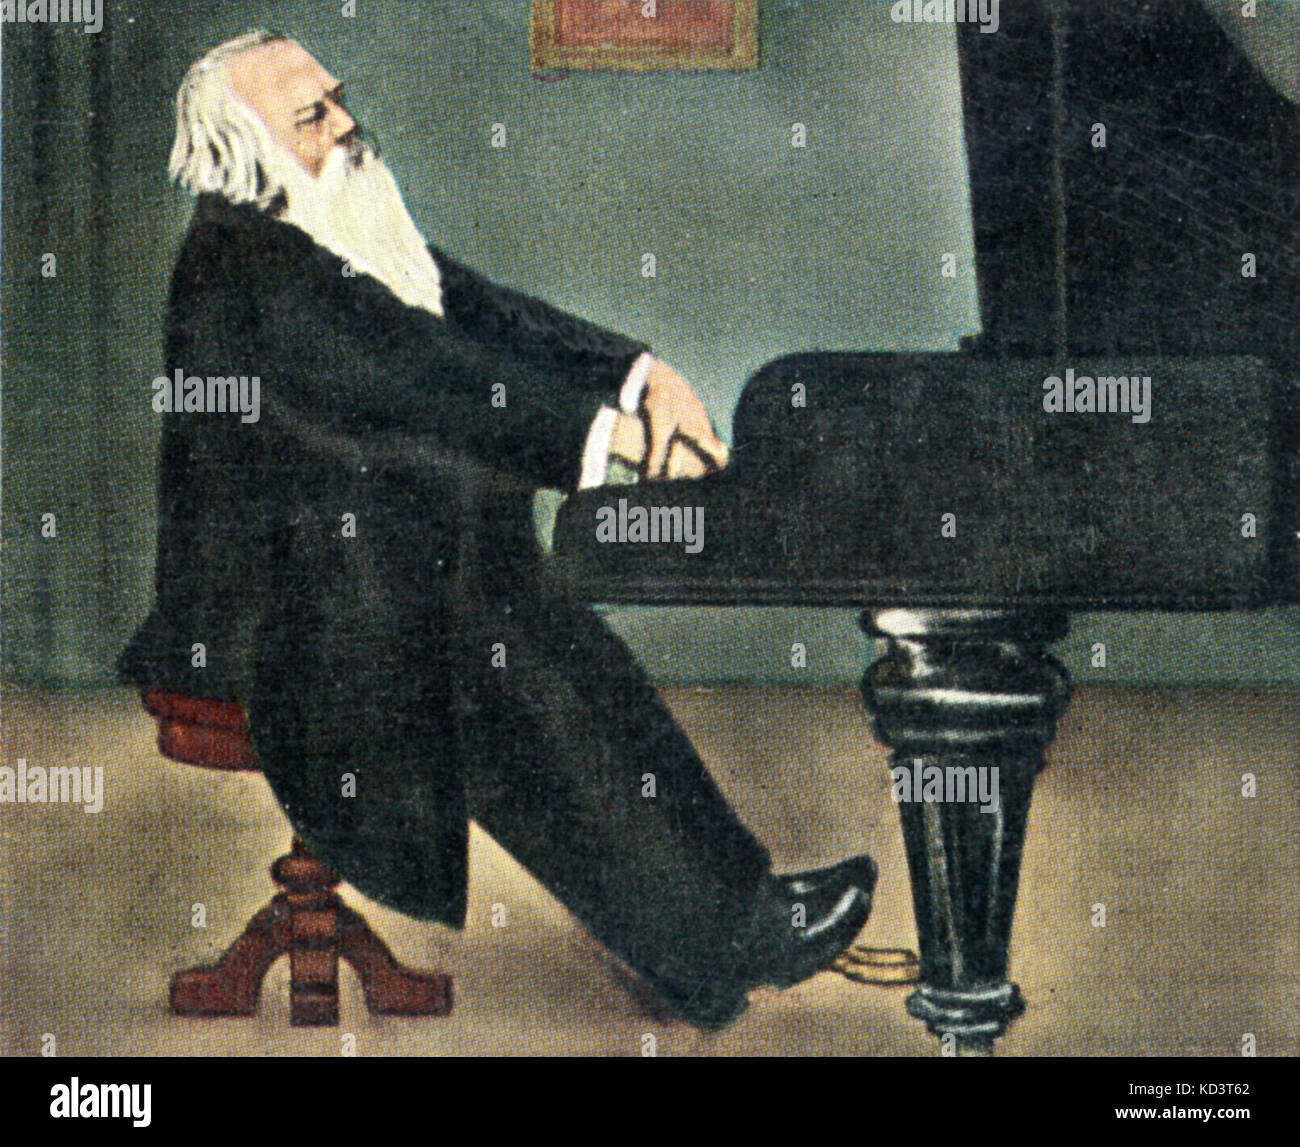 Brahms At The Piano High Resolution Stock Photography and Images - Alamy